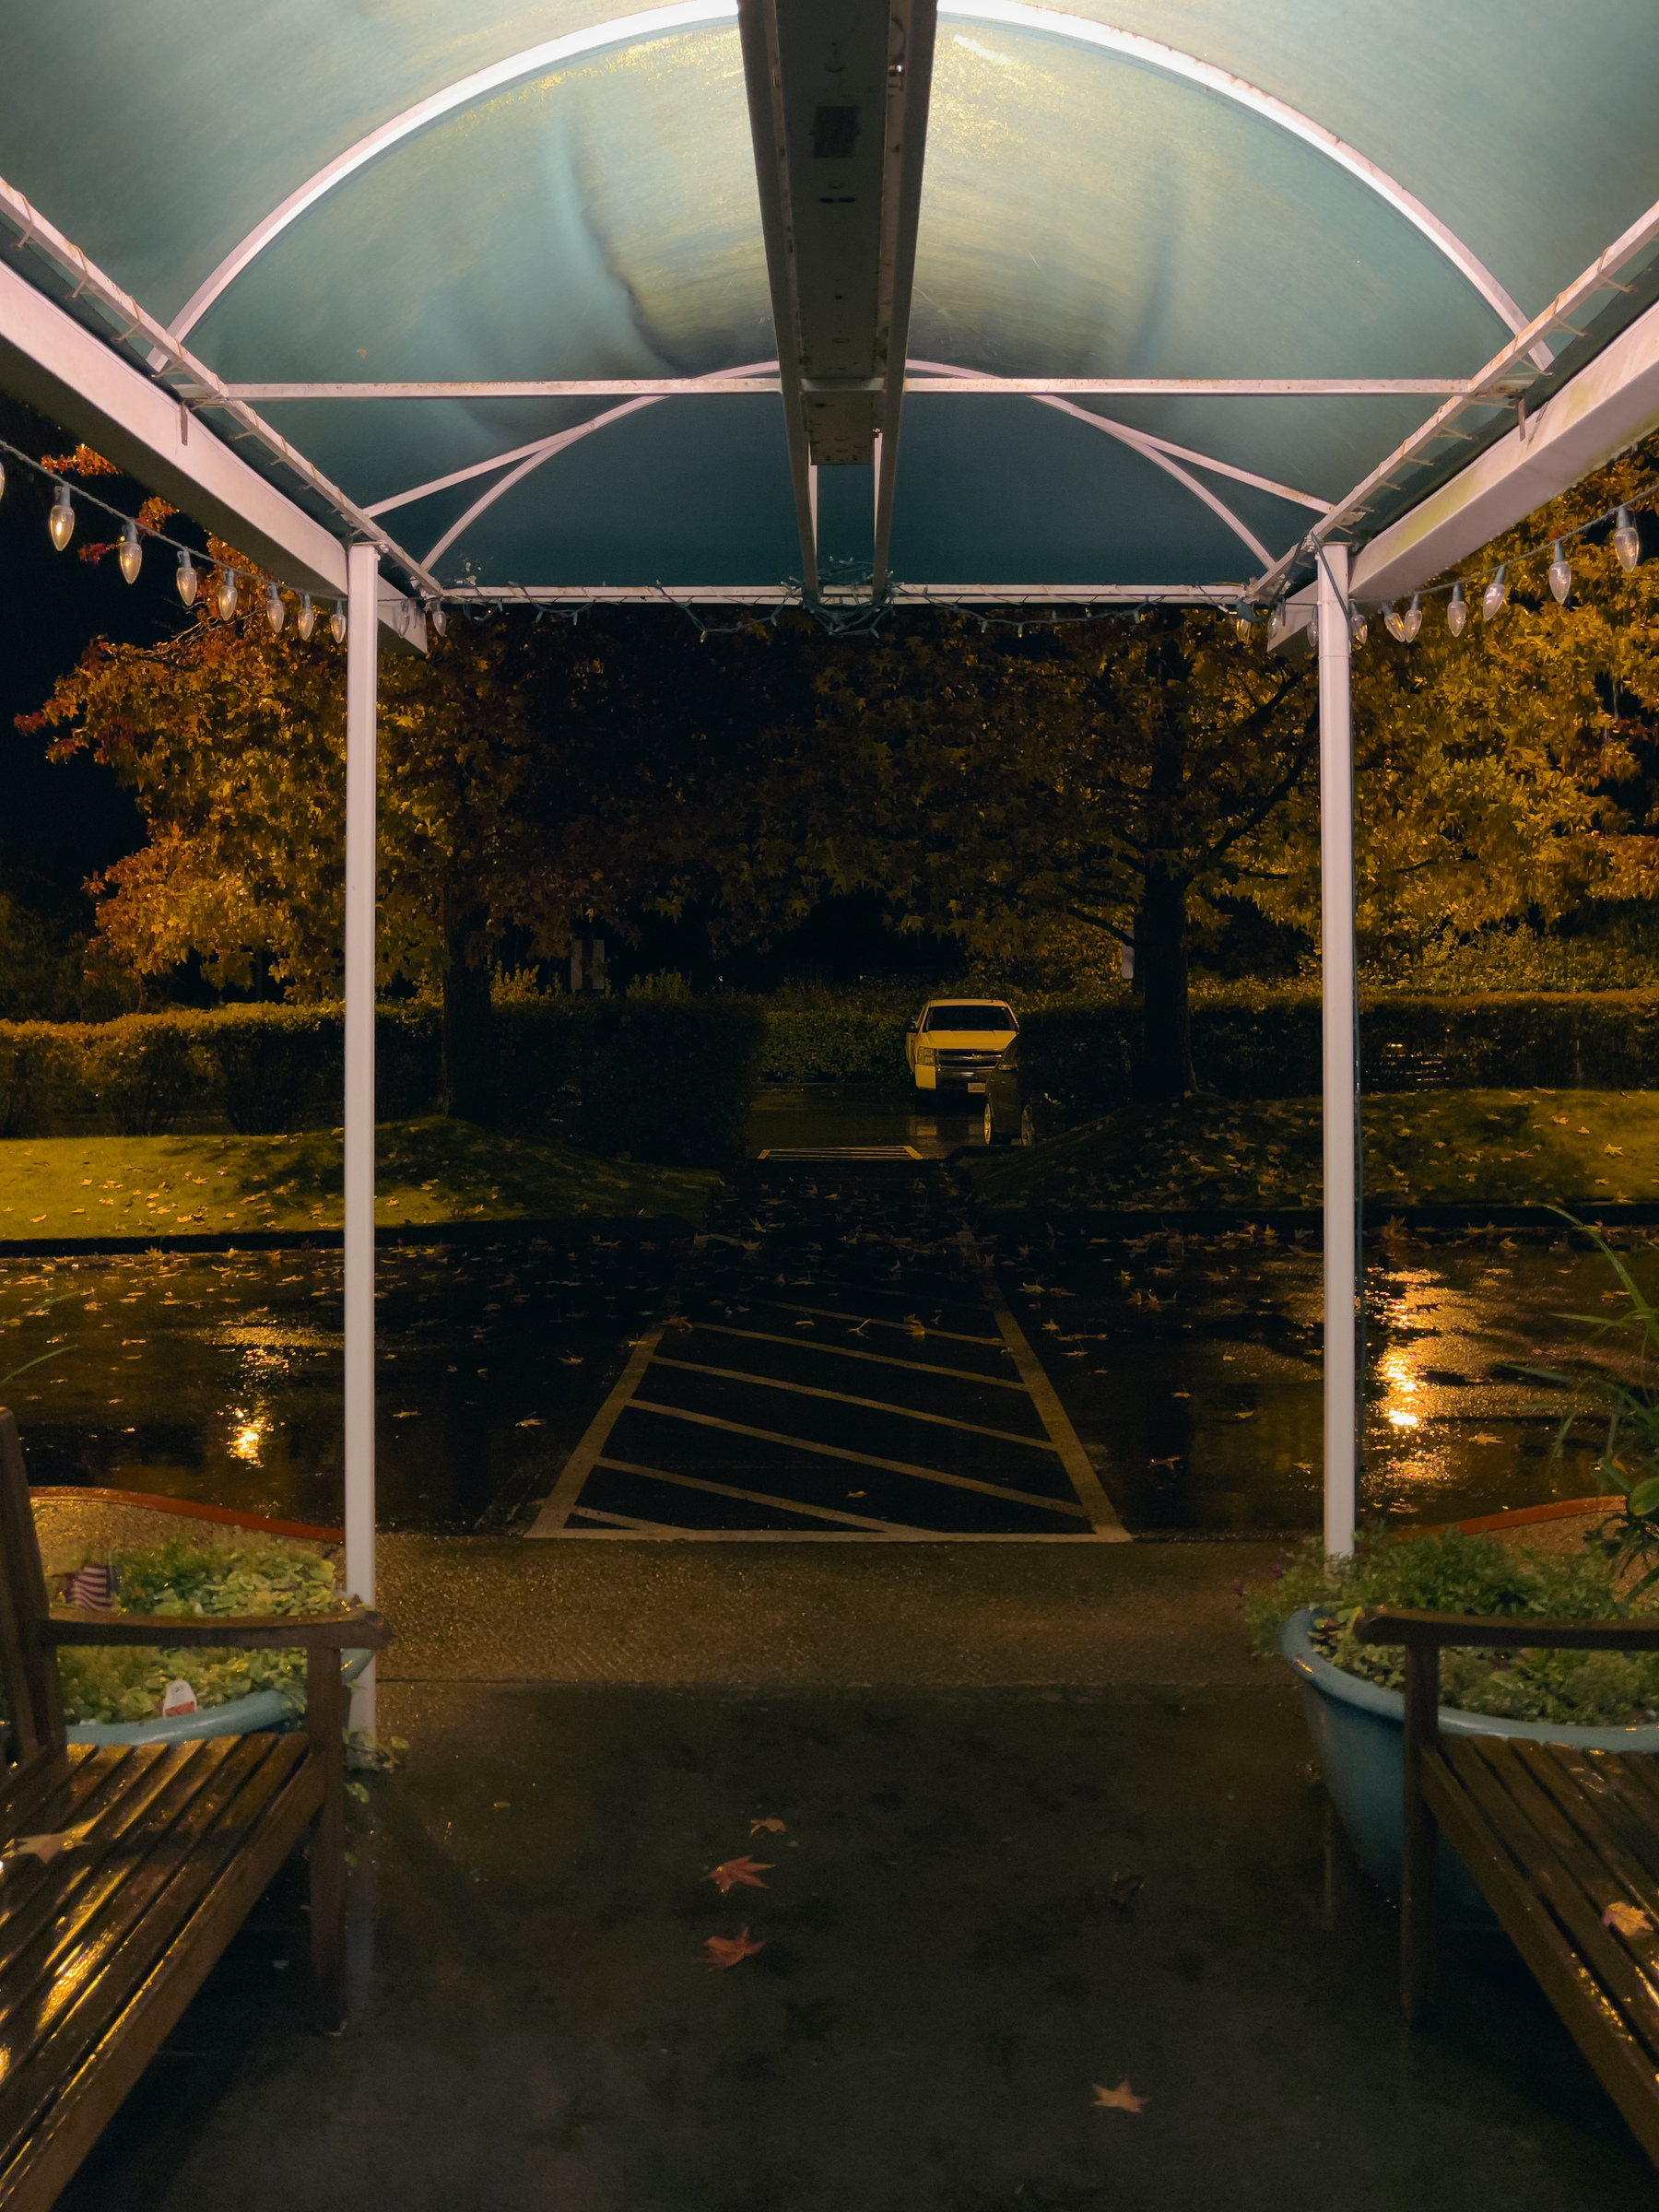 Arched canopy covering walkway, parking lot landscape beyond, nightscape.